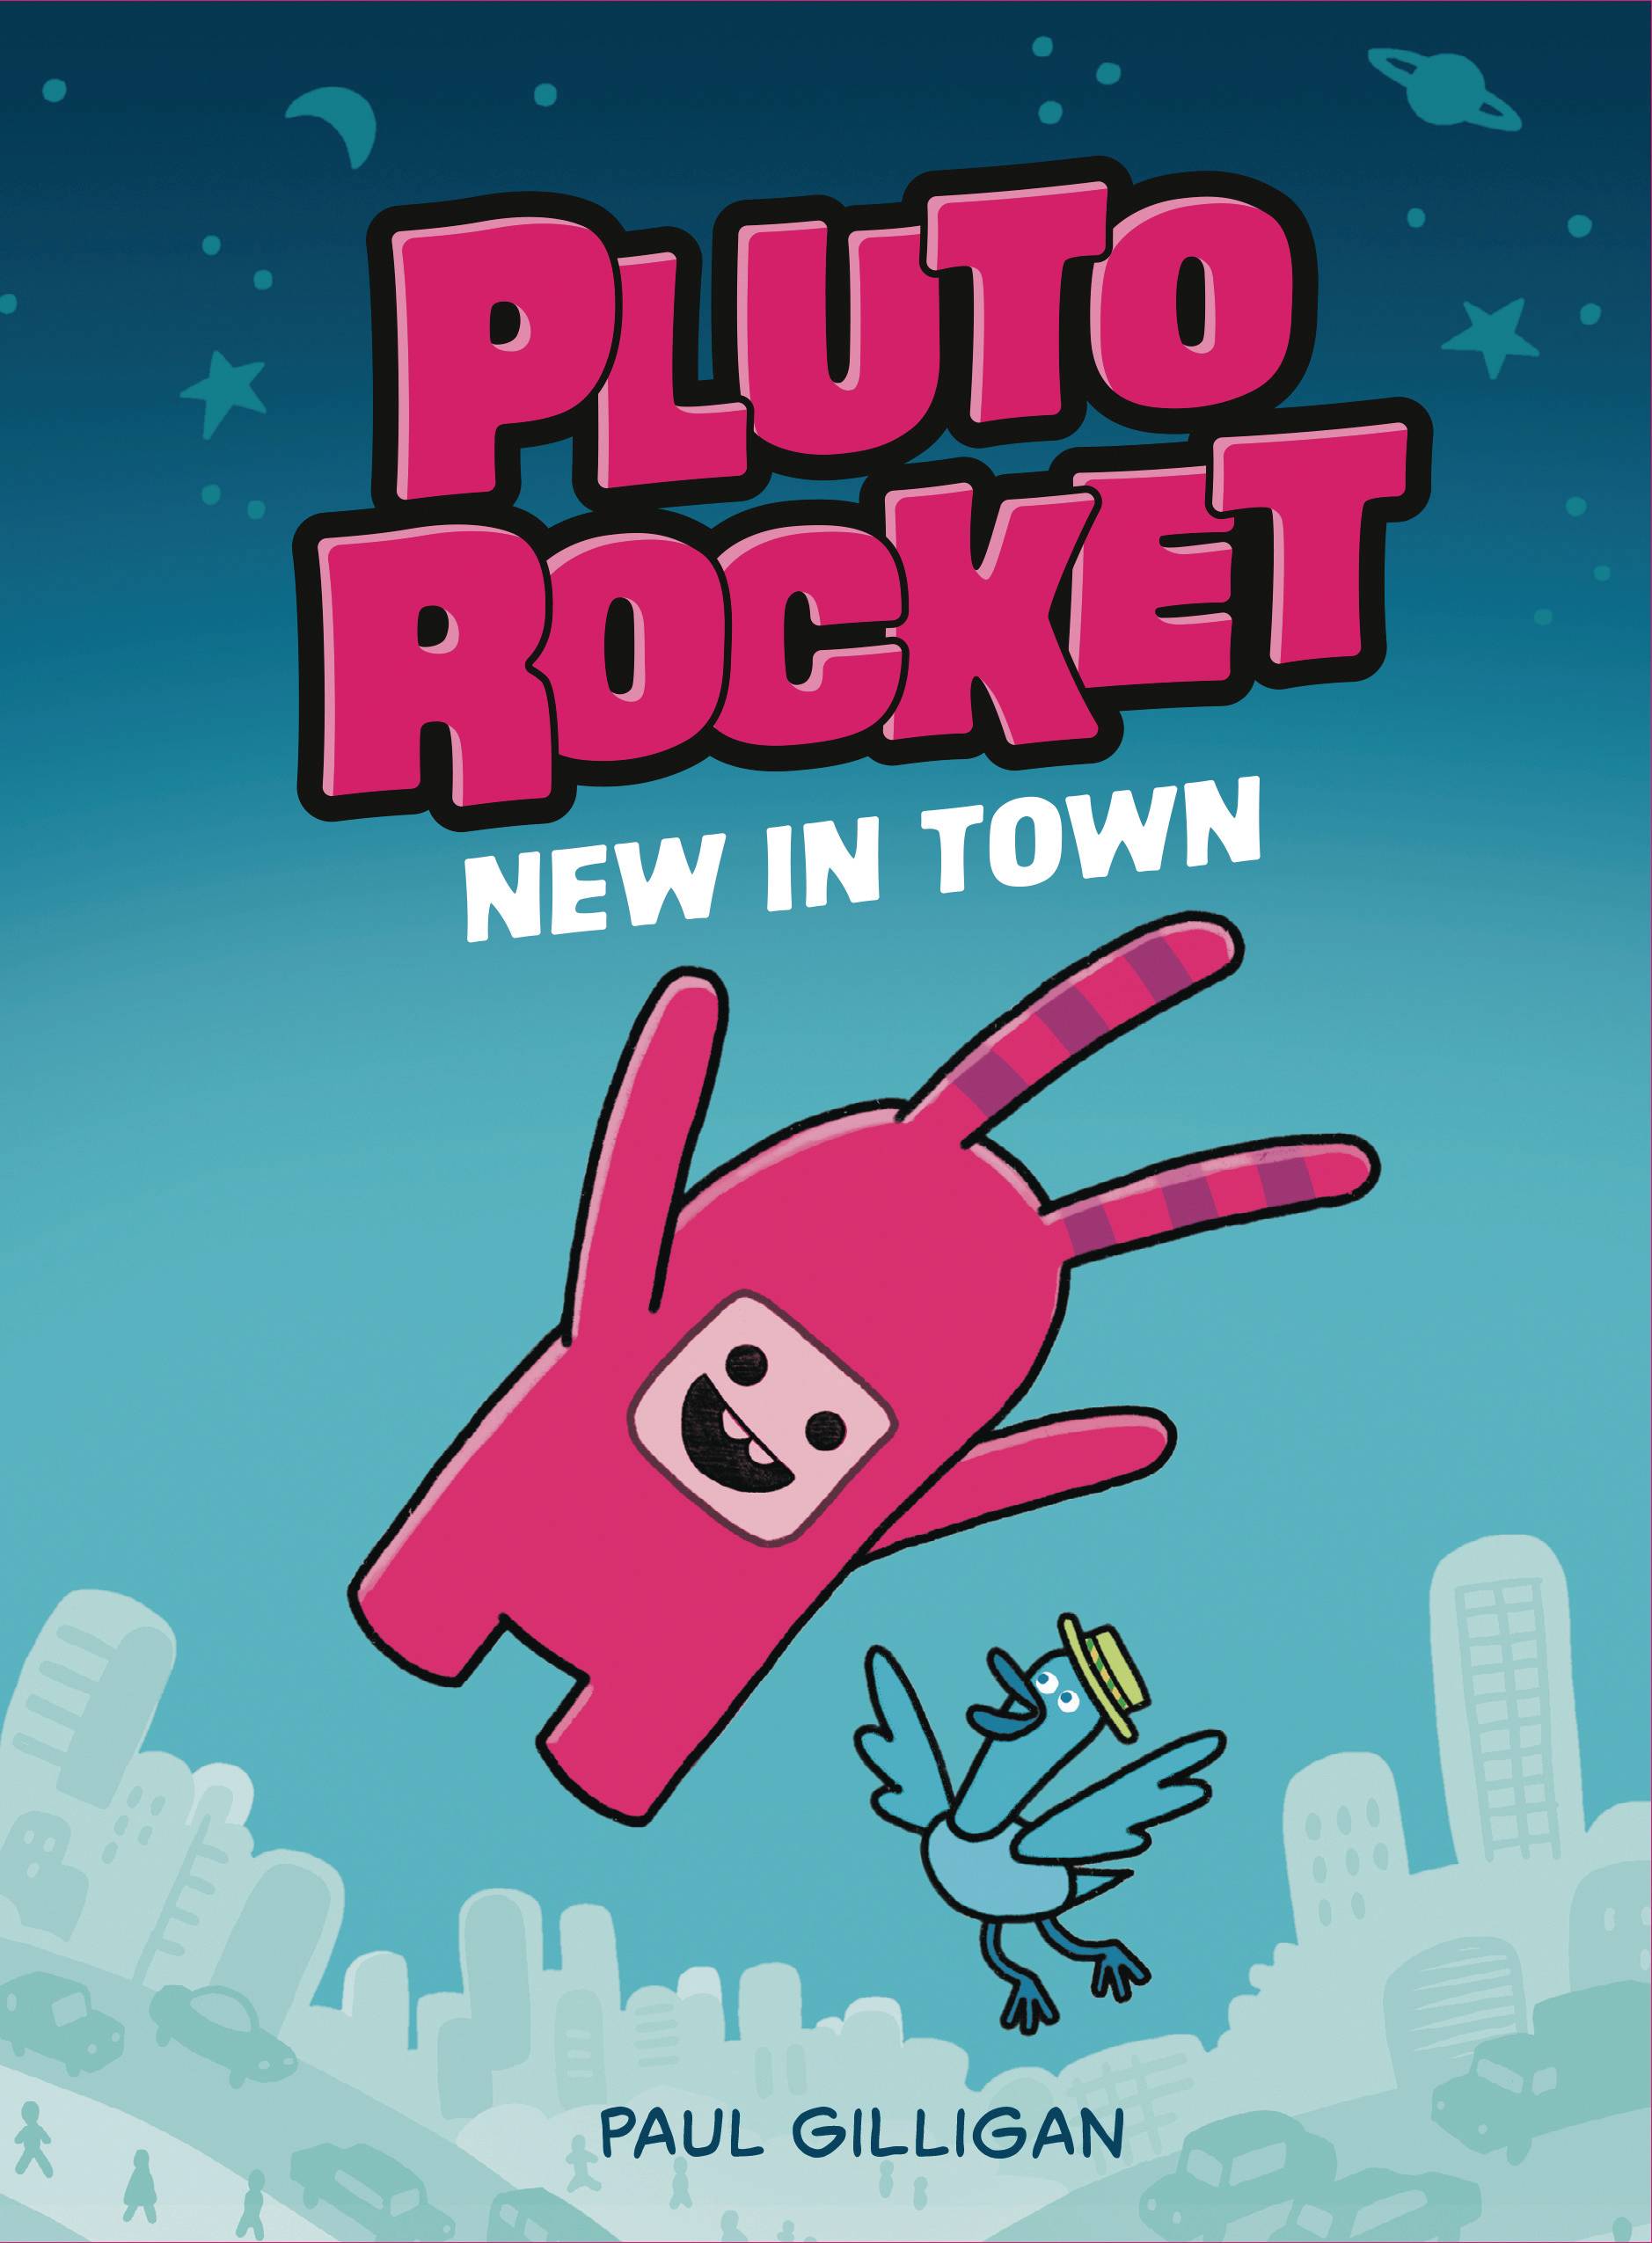 PLUTO ROCKET GN VOL 01 NEW IN TOWN